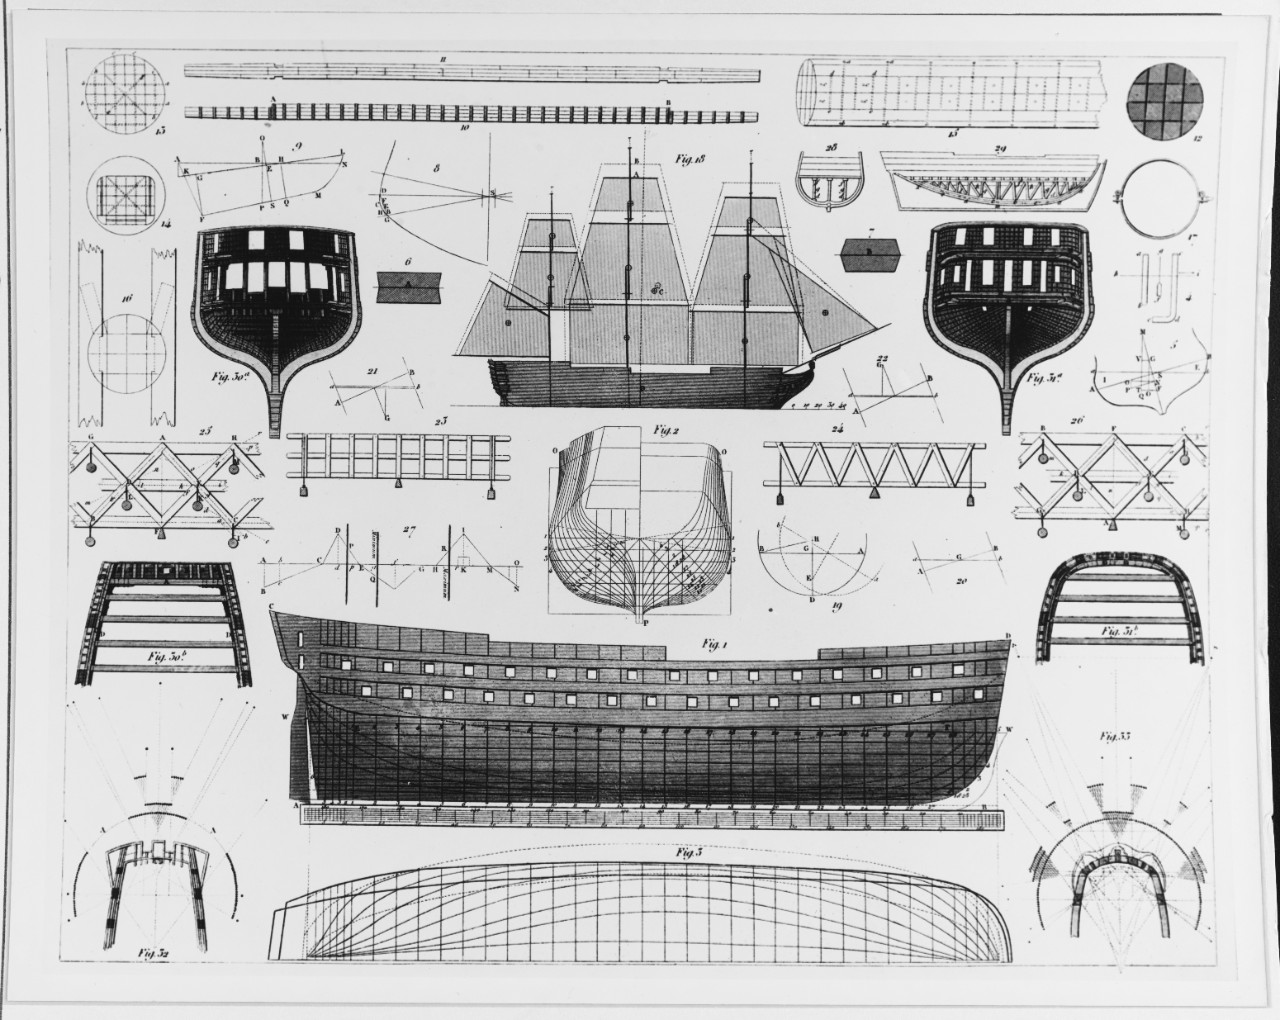 Early Shipbuilding Science